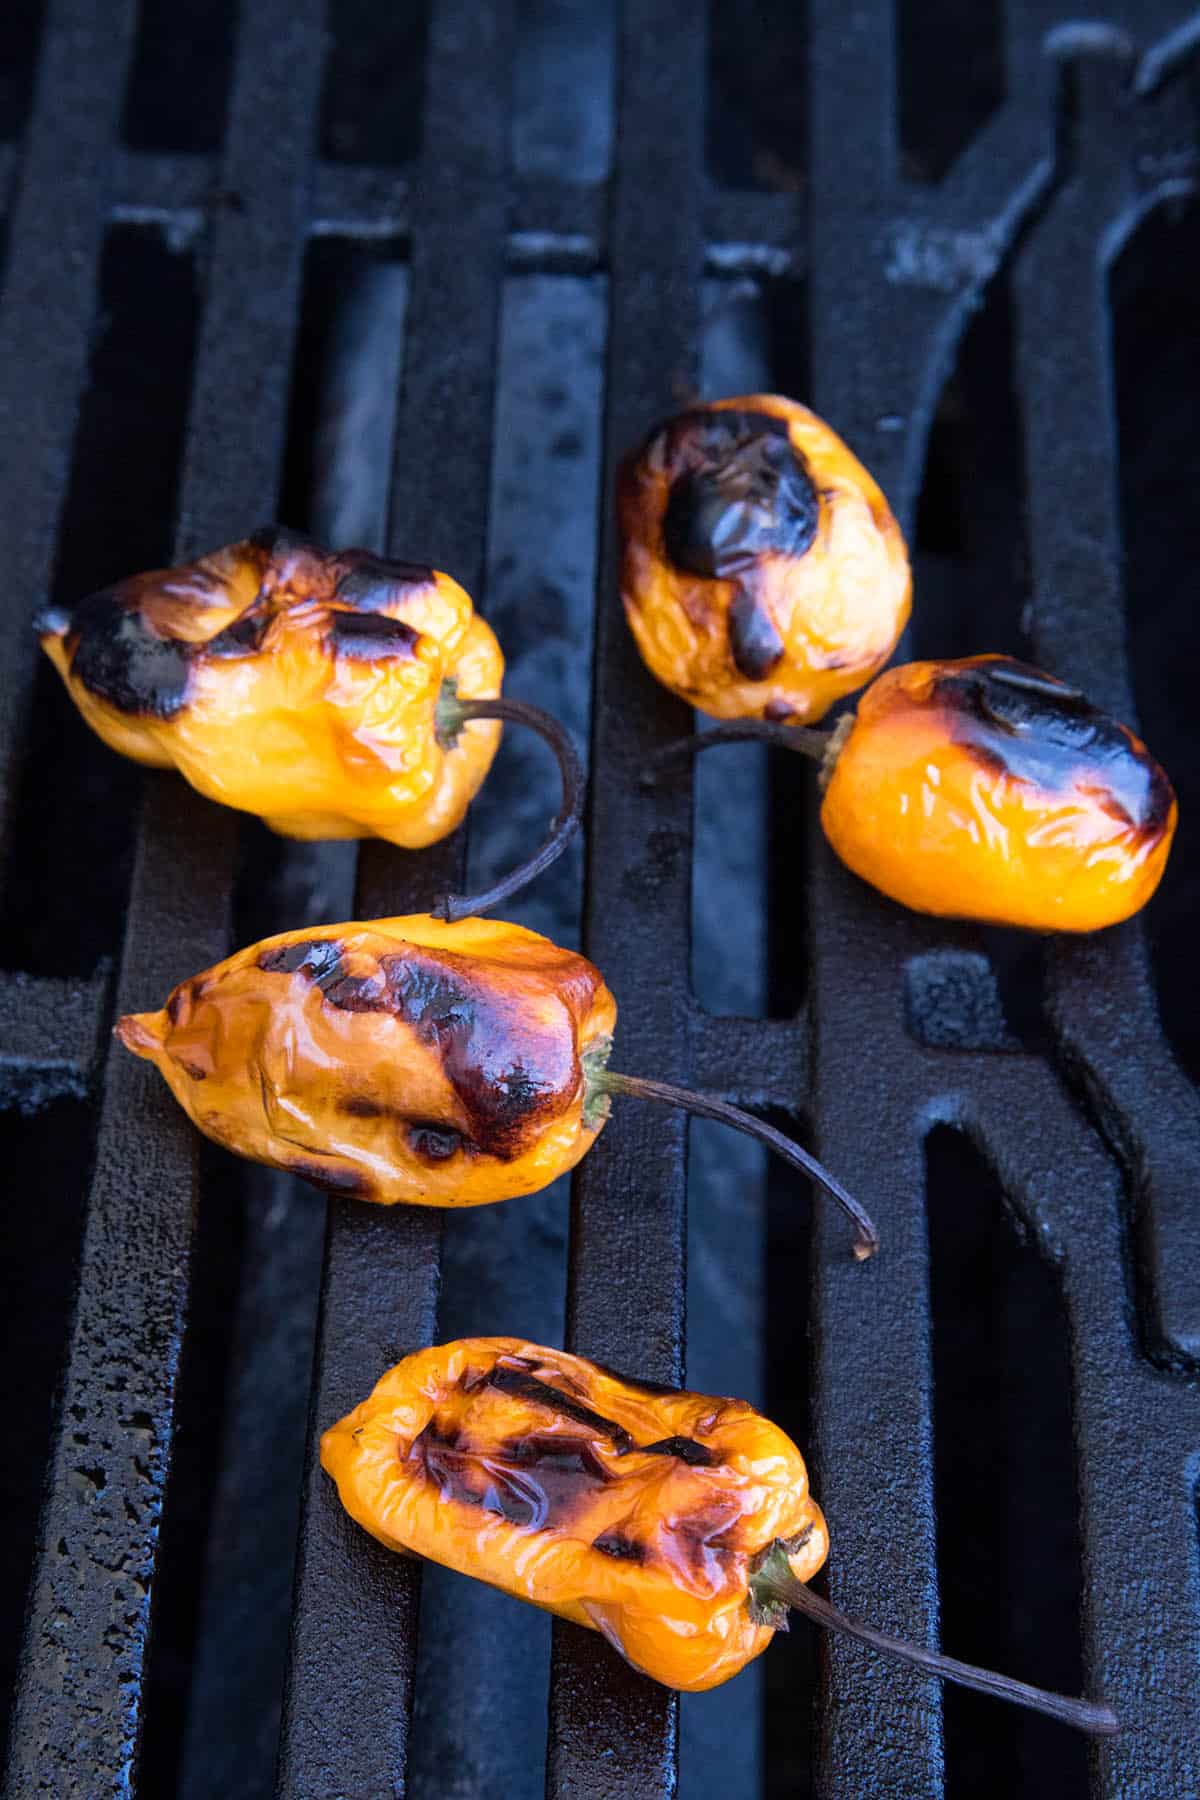 Charring habanero peppers on the grill